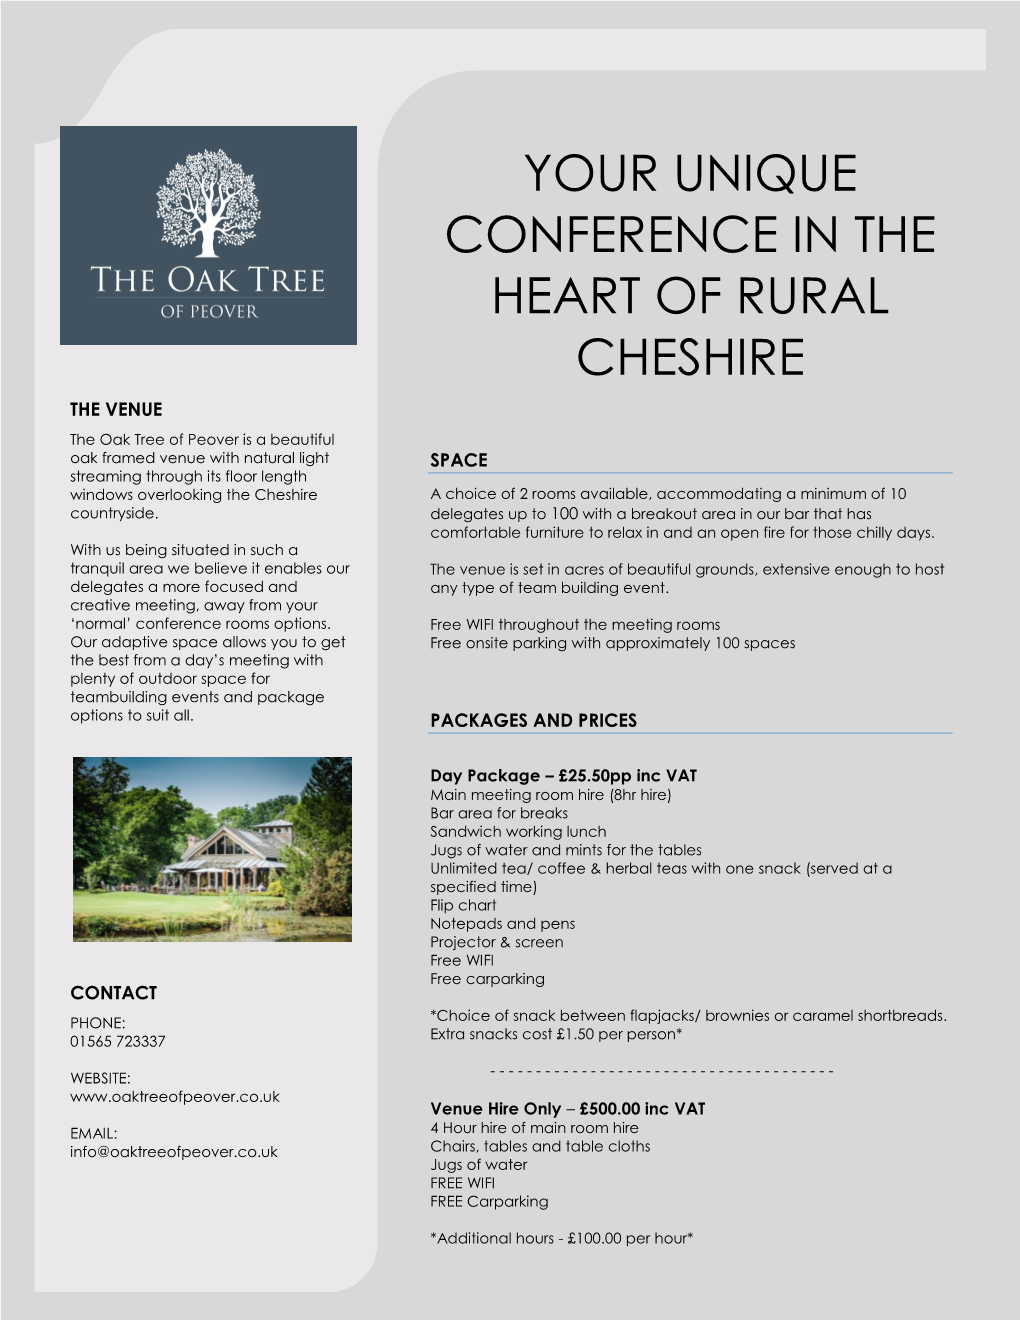 Your Unique Conference in the Heart of Rural Cheshire